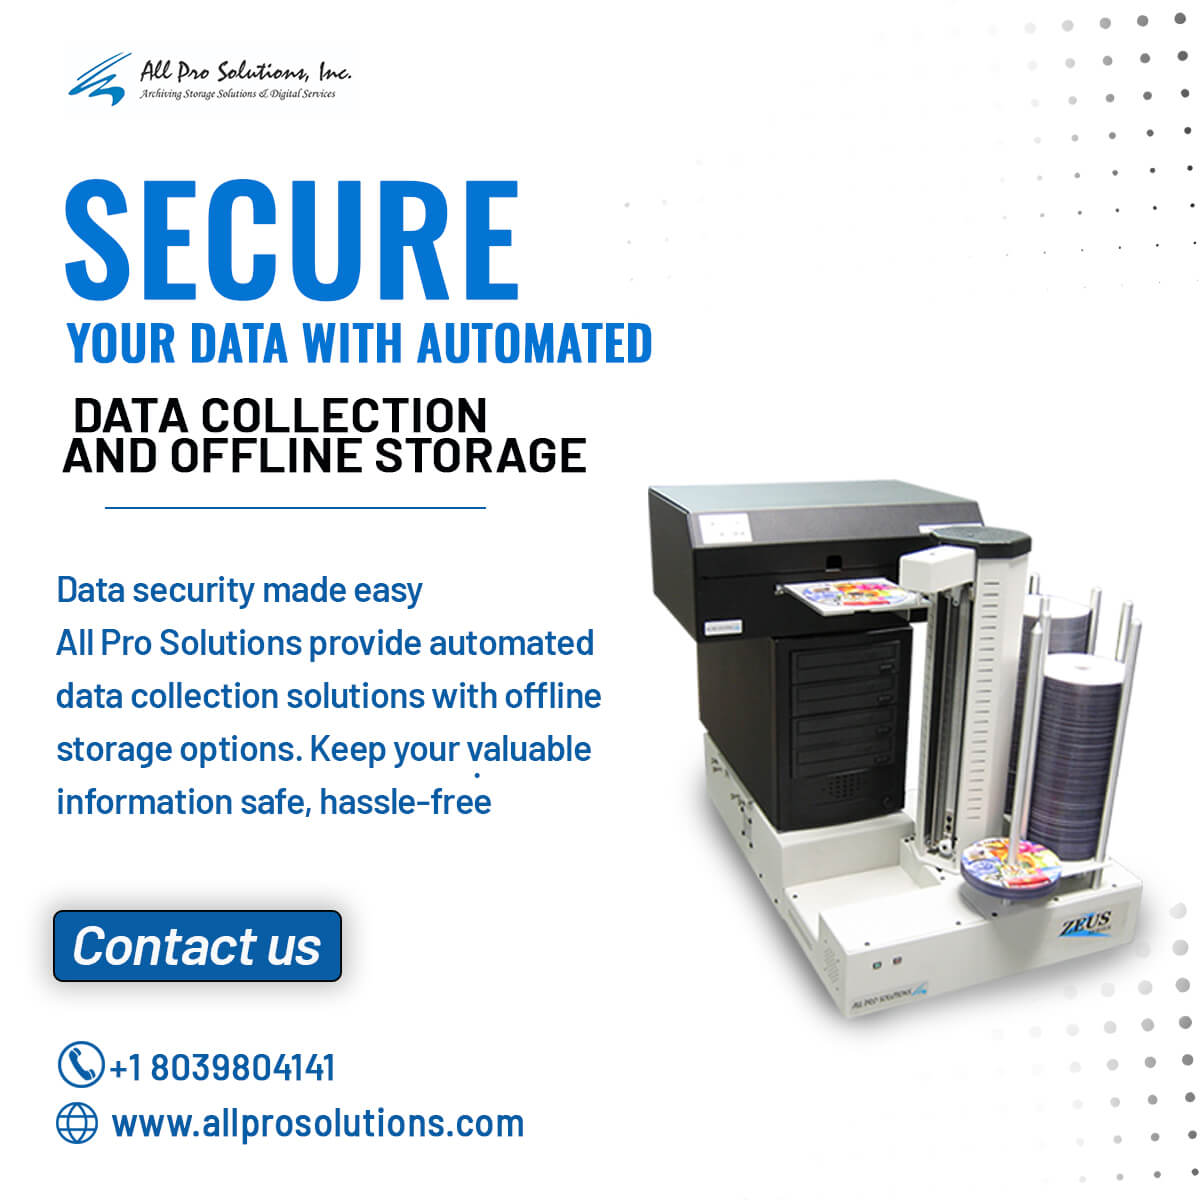 Simplify Storage with Automated Data Collection Systems - South Carolina - Columbia ID1540356